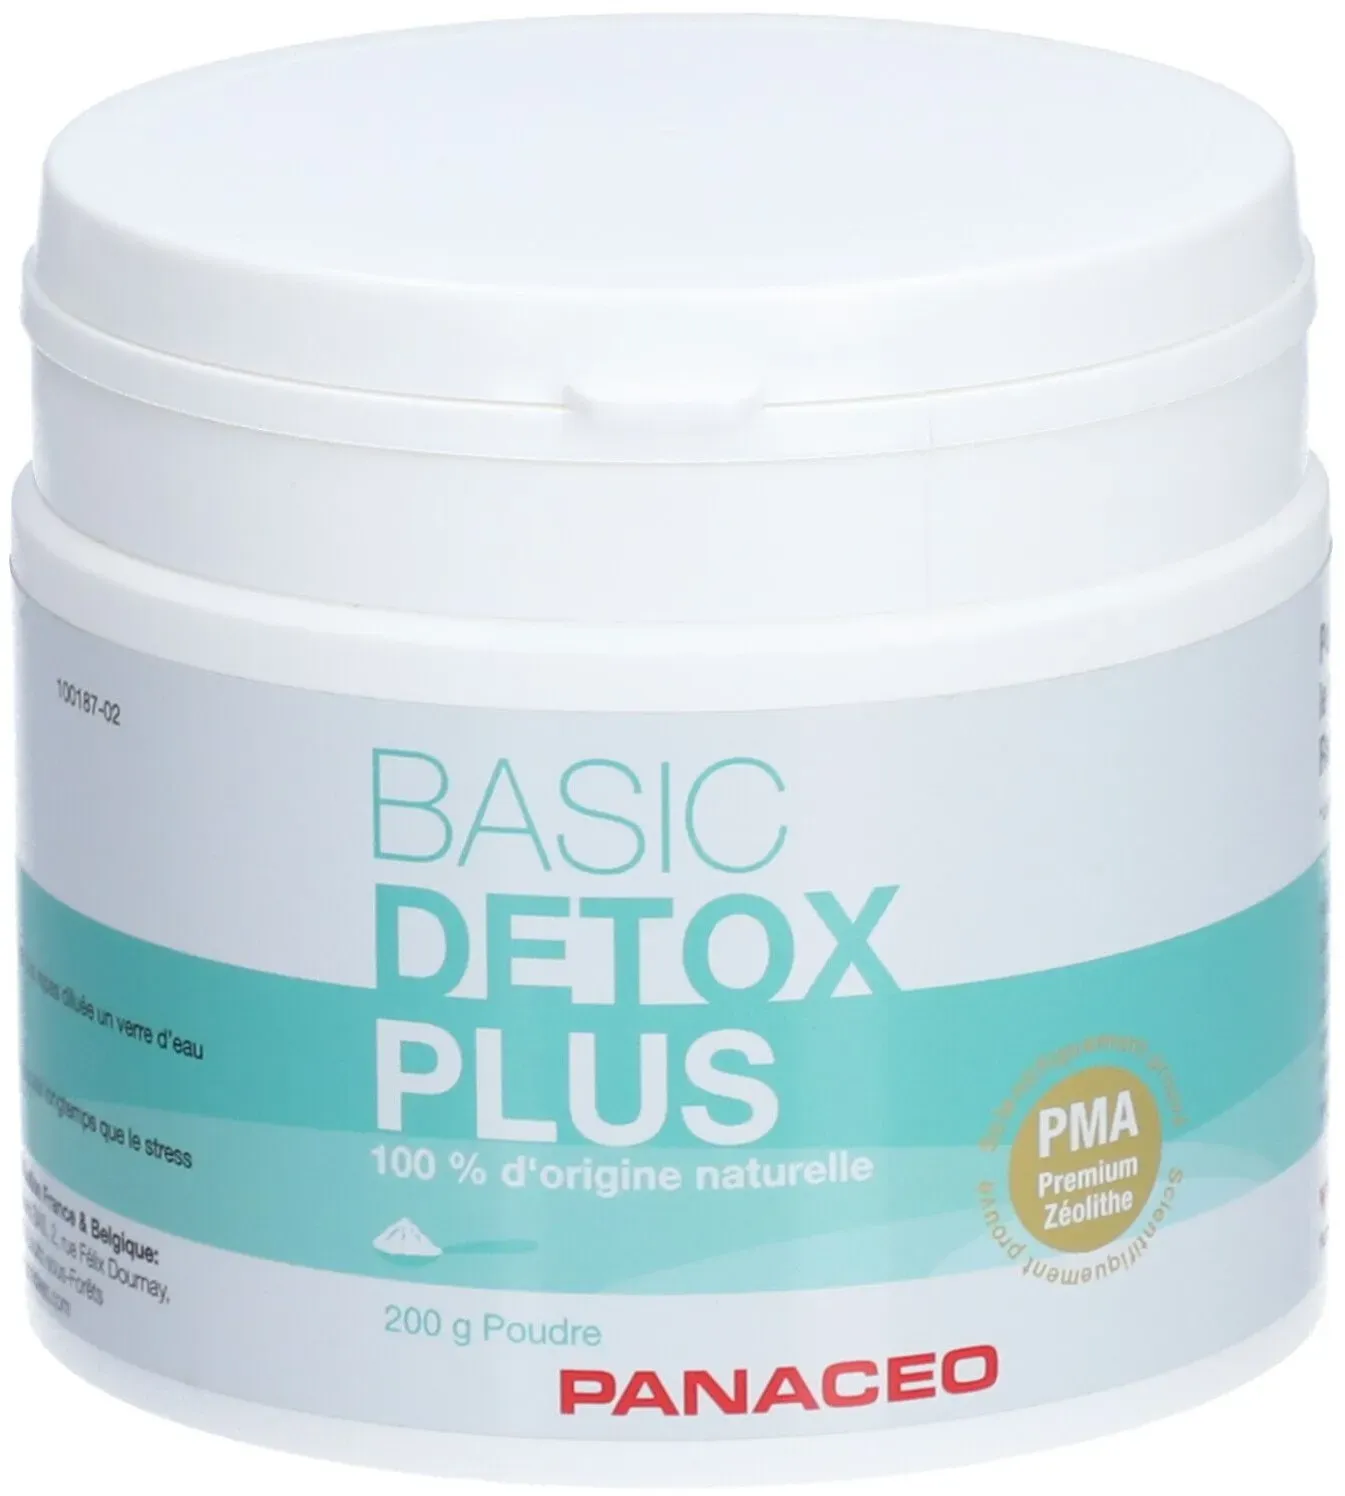 ECOIDEES PANACEO BASIC PDR 200G 200 g Poudre